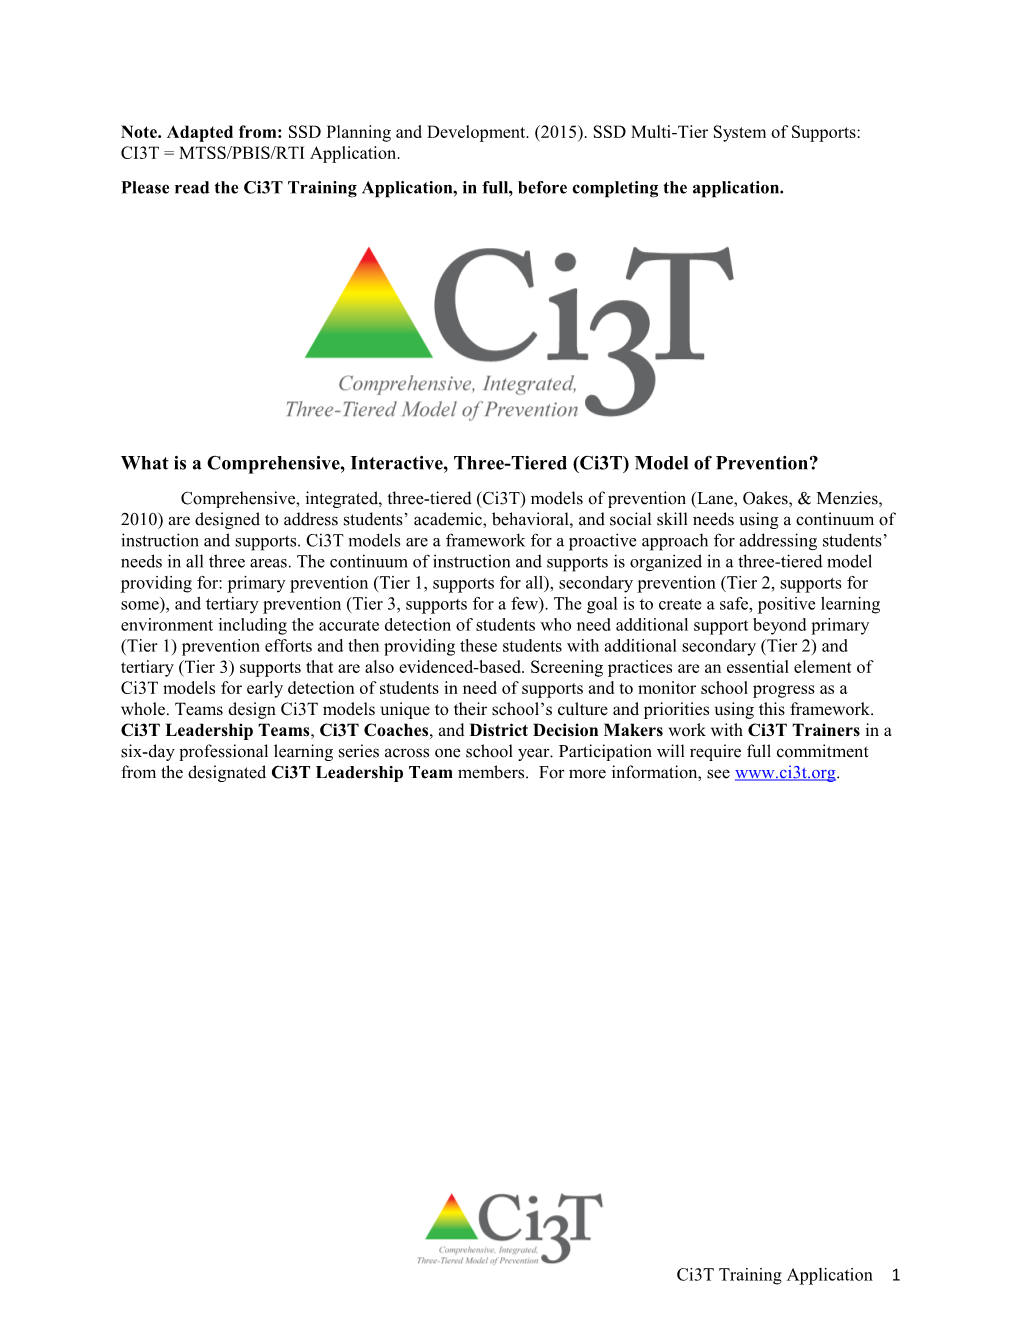 Please Read the Ci3t Training Application, in Full, Before Completing the Application